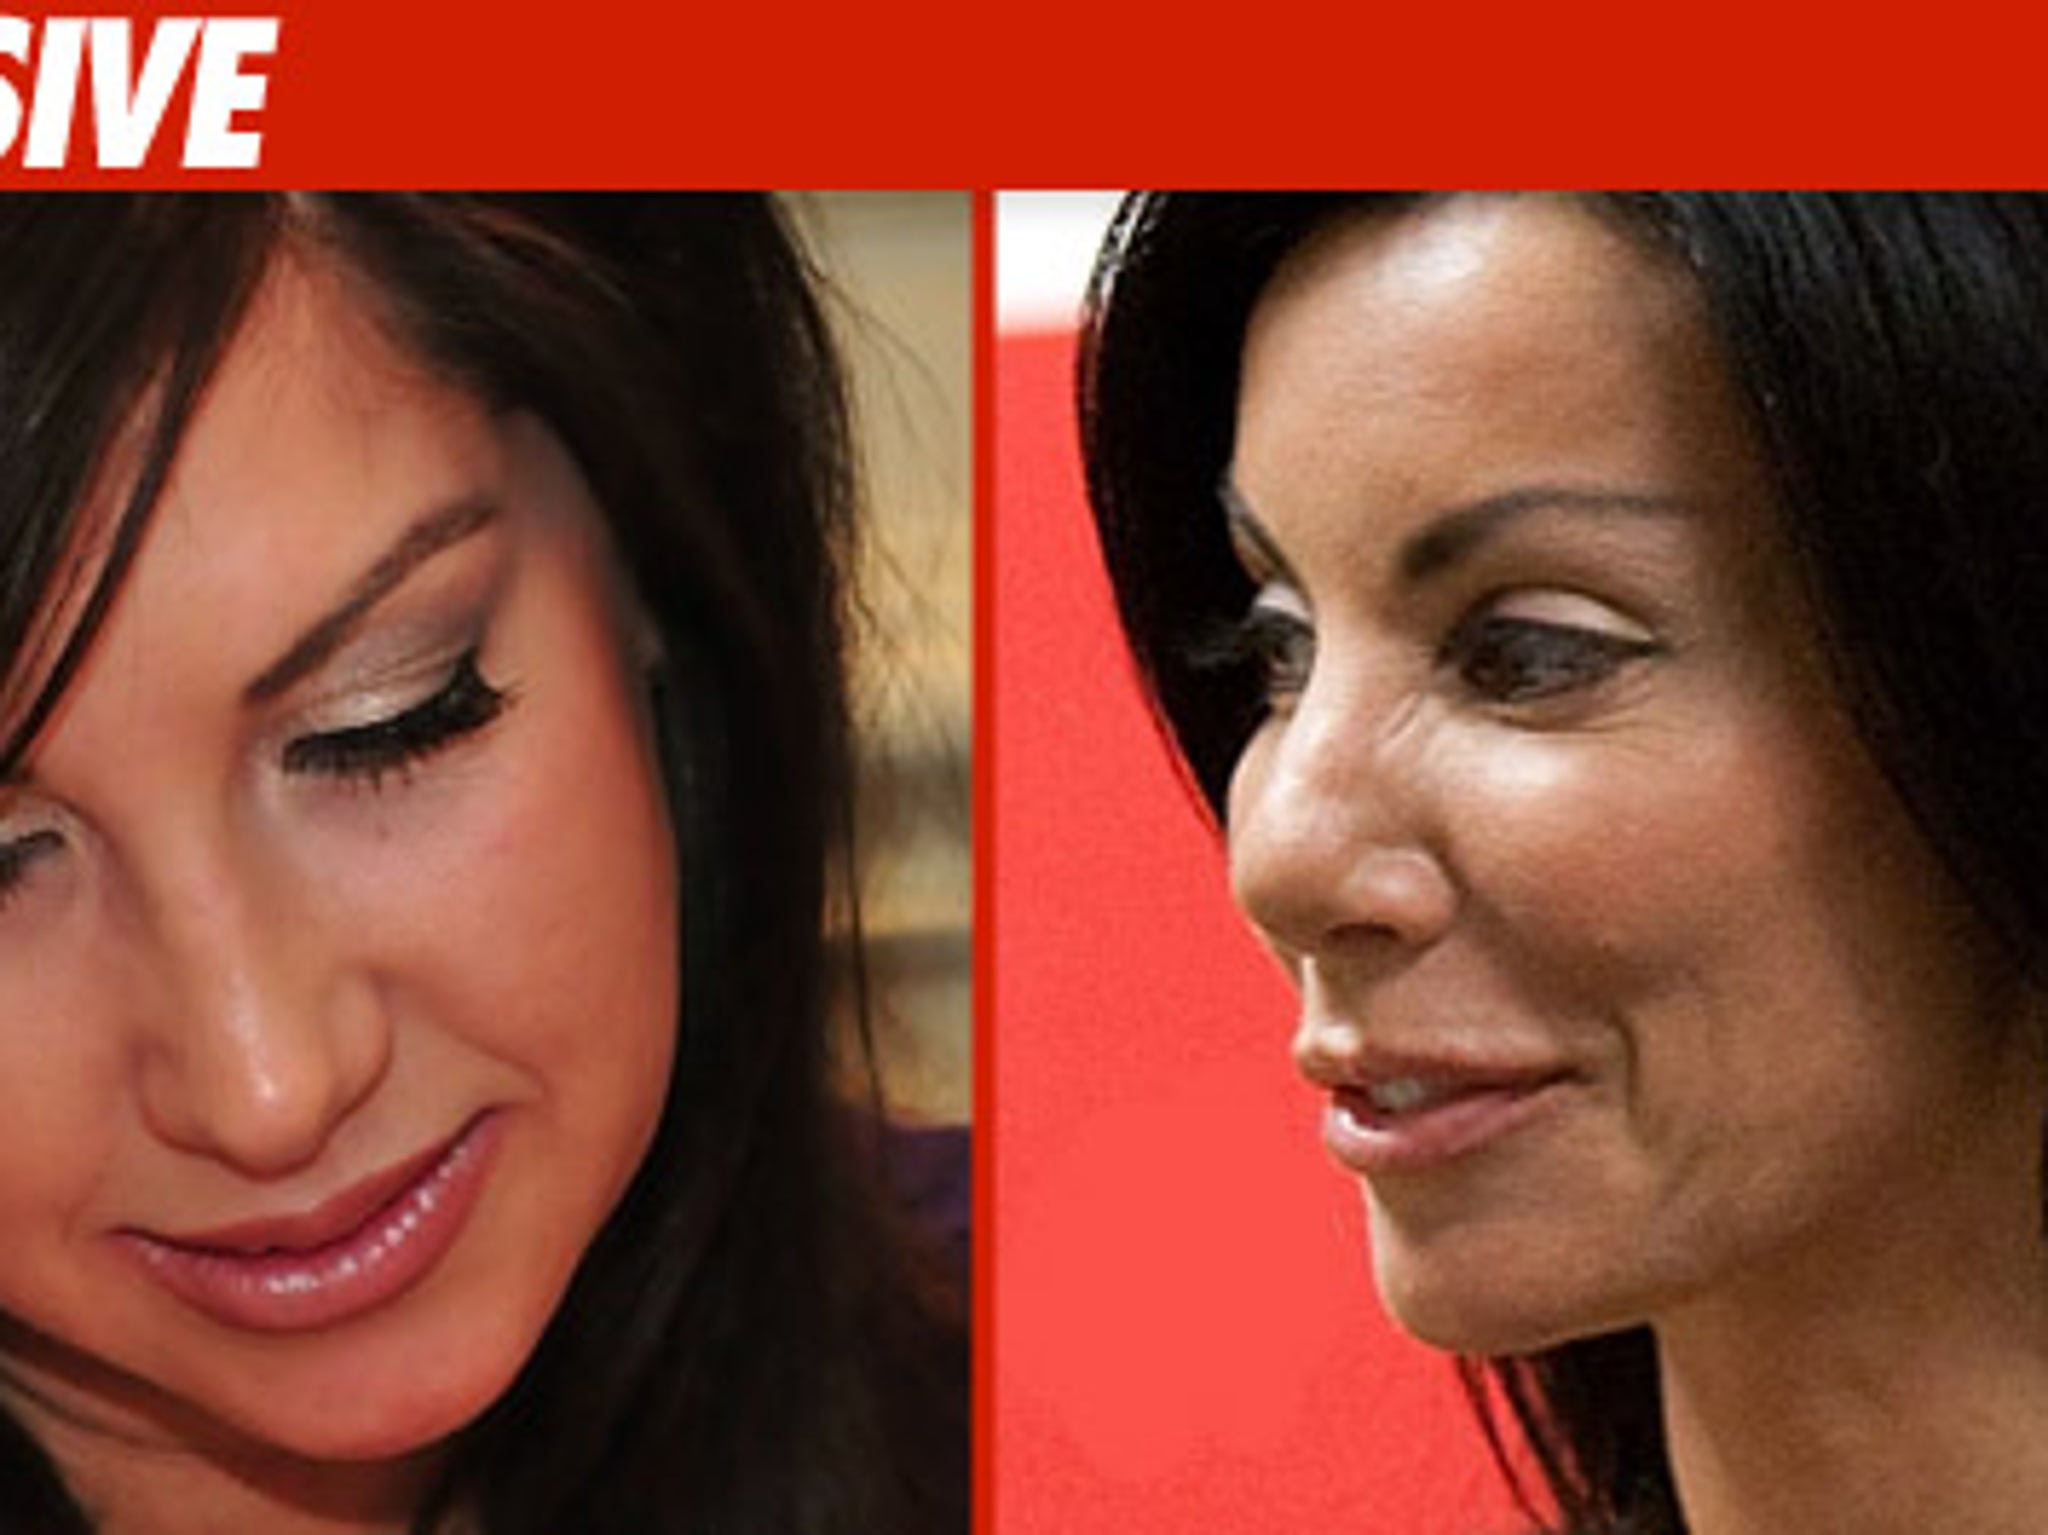 Danielle Staub - Castmate Blasts 'Jersey' Housewife Over Sex Tape